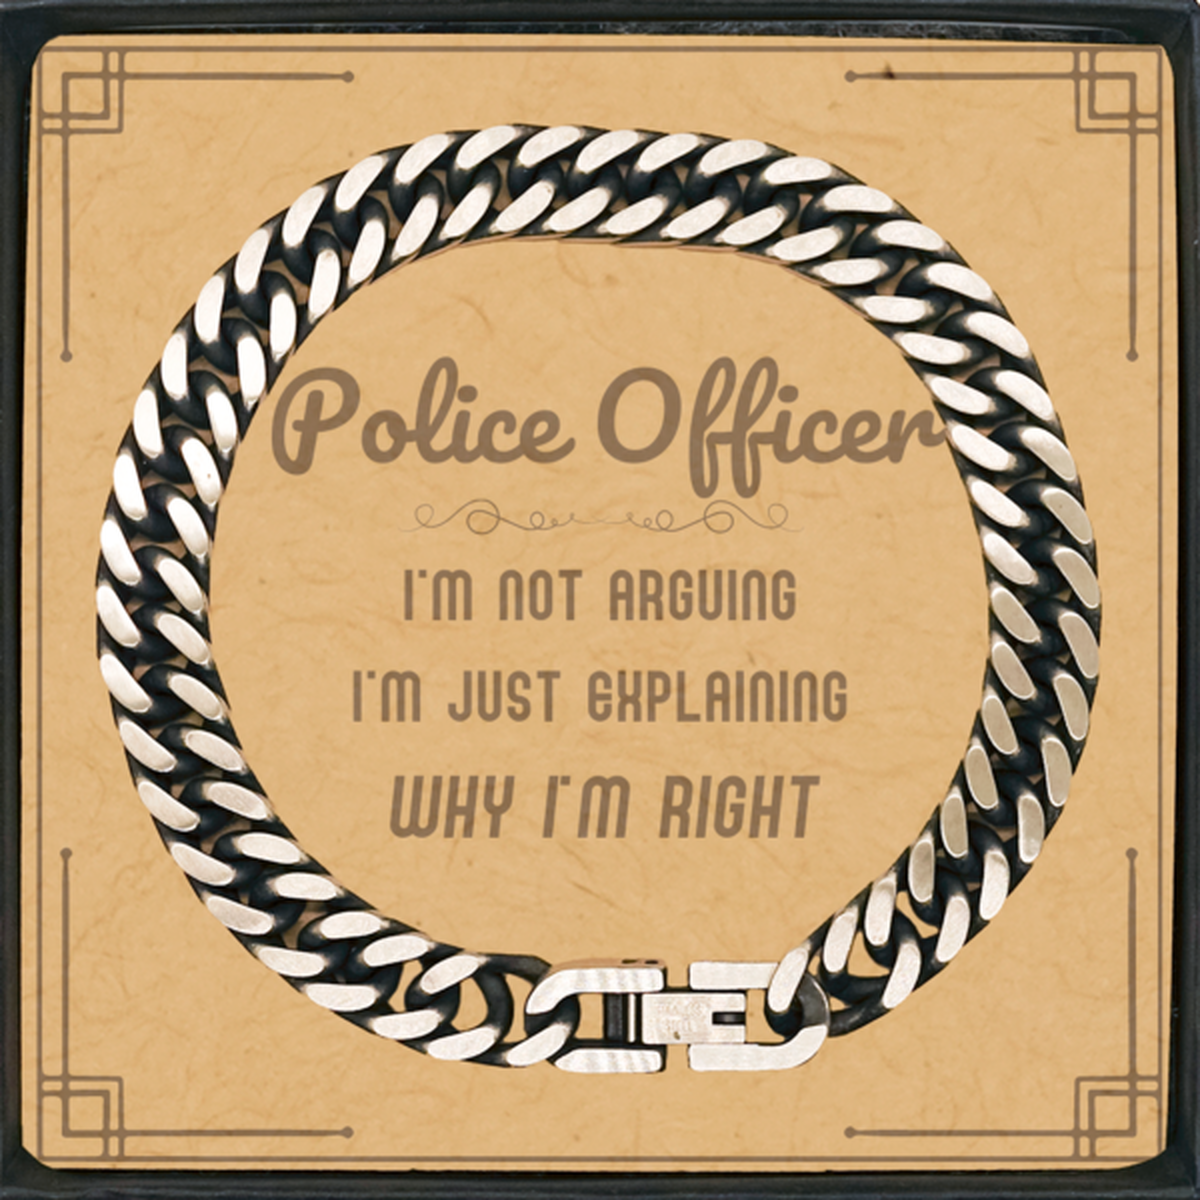 Police Officer I'm not Arguing. I'm Just Explaining Why I'm RIGHT Cuban Link Chain Bracelet, Funny Saying Quote Police Officer Gifts For Police Officer Message Card Graduation Birthday Christmas Gifts for Men Women Coworker